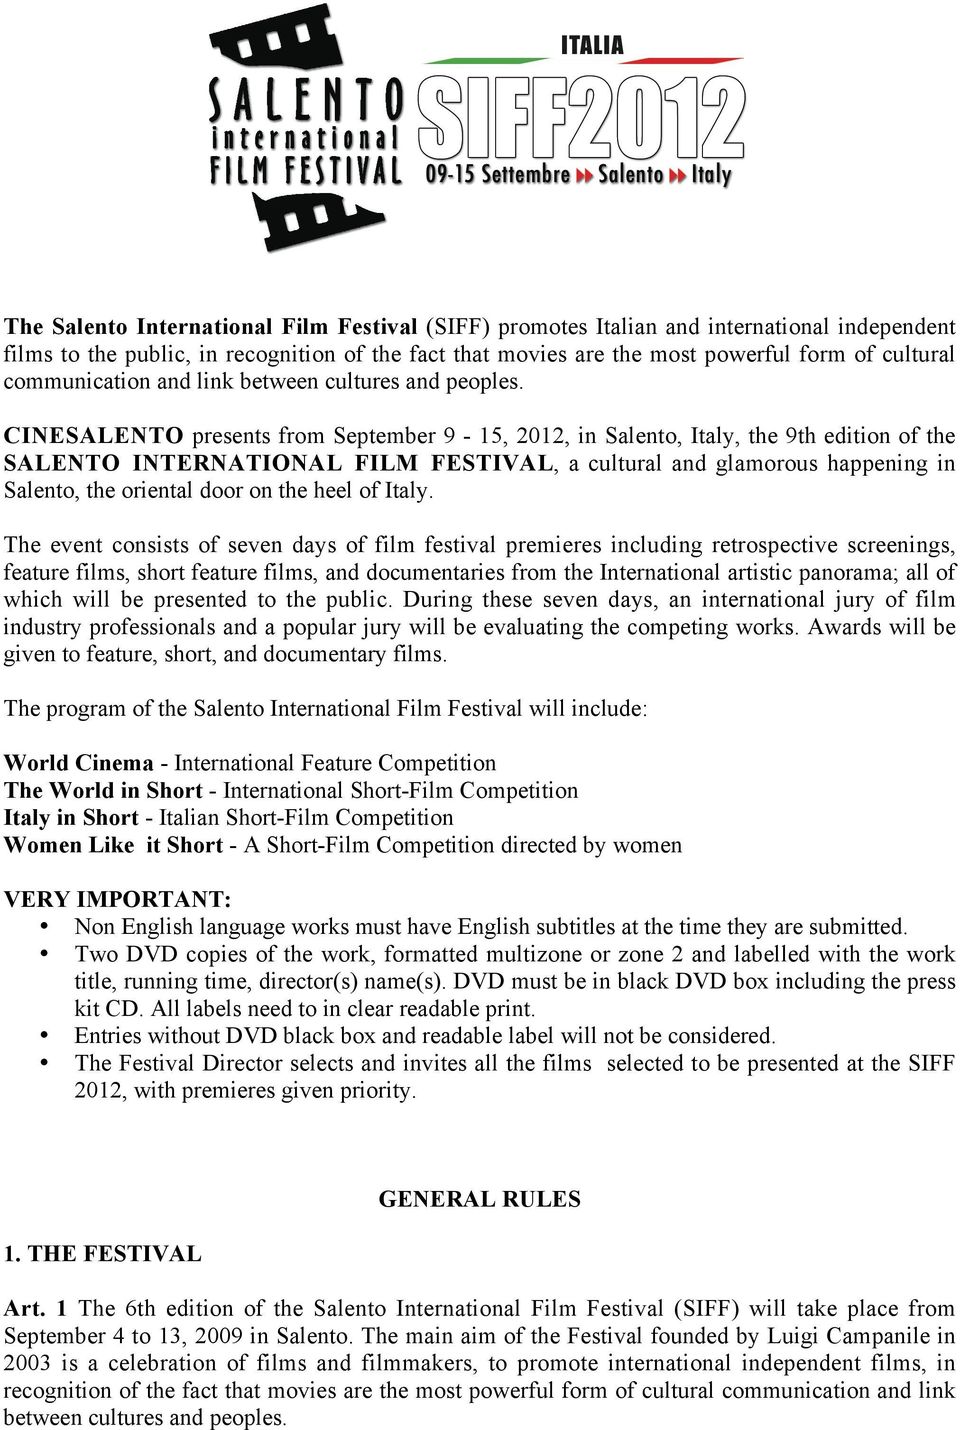 CINESALENTO presents from September 9-15, 2012, in Salento, Italy, the 9th edition of the SALENTO INTERNATIONAL FILM FESTIVAL, a cultural and glamorous happening in Salento, the oriental door on the